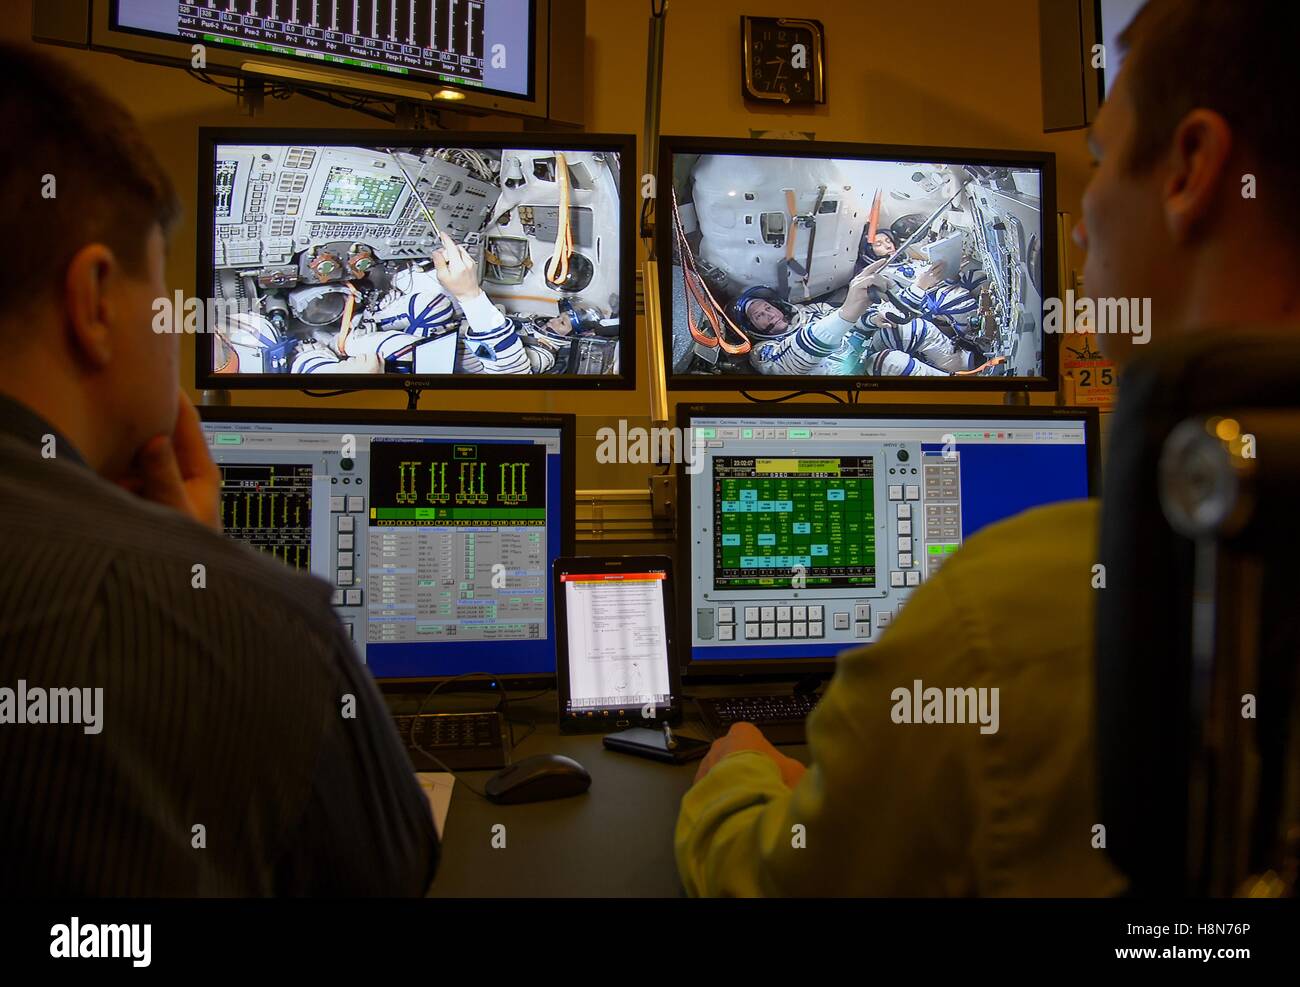 Ground control operators watch NASA International Space Station Expedition 50 Soyuz MS-03 prime crew members French astronaut Thomas Pesquet of the European Space Agency, Russian cosmonaut Oleg Novitskiy of Roscosmos, and American astronaut Pegg Whitson on control room monitors during the Soyuz simulator final qualification exams at the Gagarin Cosmonaut Training Center October 25, 2016 in Star City, Russia. Stock Photo